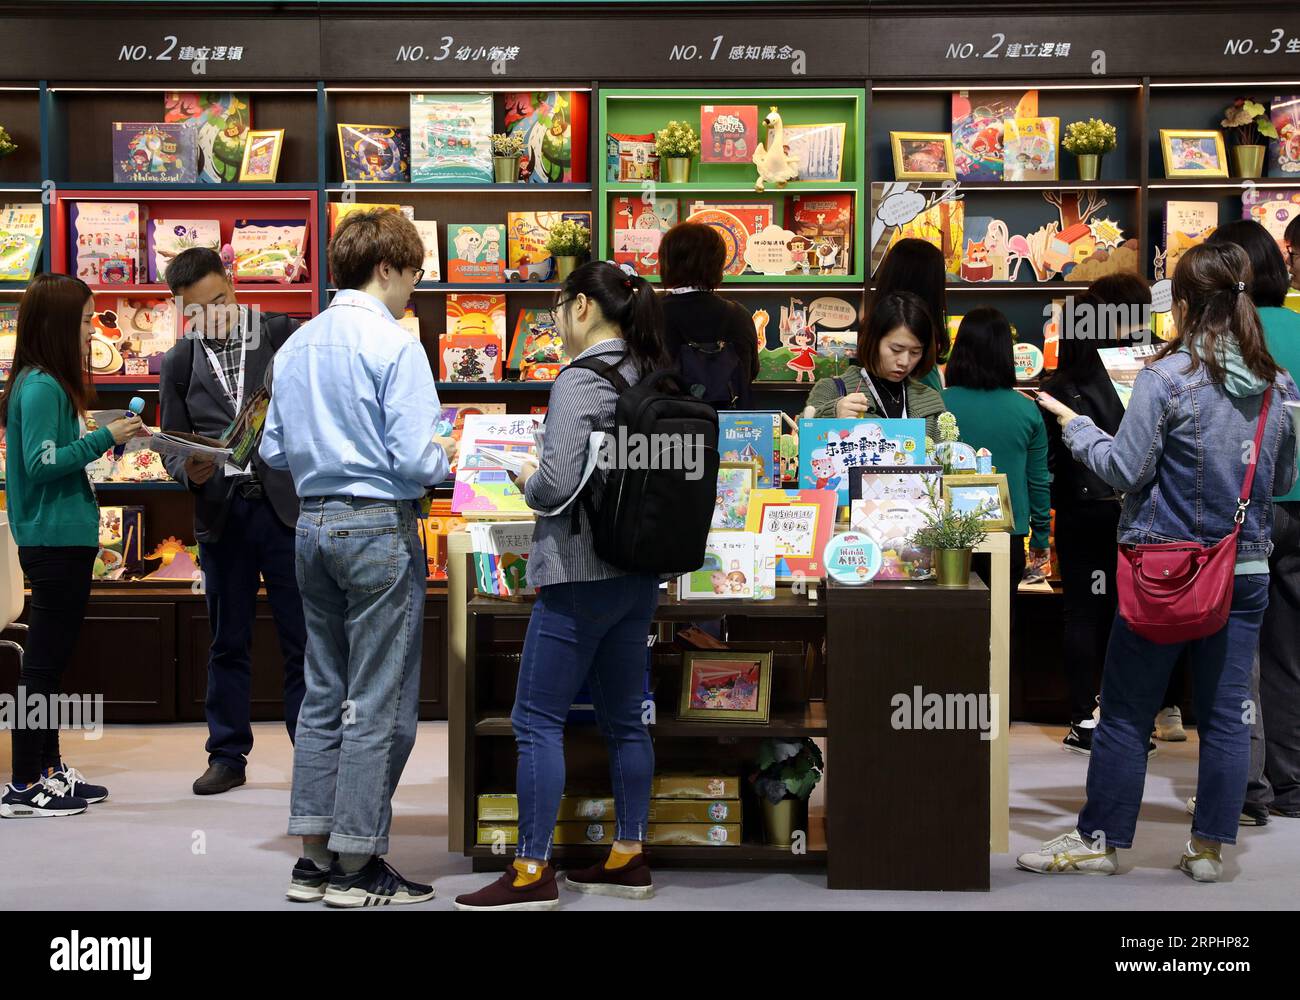 191115 -- SHANGHAI, Nov. 15, 2019 -- People select books during the 2019 China Shanghai International Children s Book Fair CCBF at Shanghai World Expo Exhibition and Convention Center in Shanghai, east China, Nov. 15, 2019. The 2019 China Shanghai International Children s Book Fair CCBF kicked off here on Friday. The three-day event bring together more than 400 exhibitors from over 30 countries and regions, including publishing houses, distributors, toymakers and training agencies.  CHINA-SHANGHAI-INT L CHILDREN S BOOK FAIR CN LiuxYing PUBLICATIONxNOTxINxCHN Stock Photo